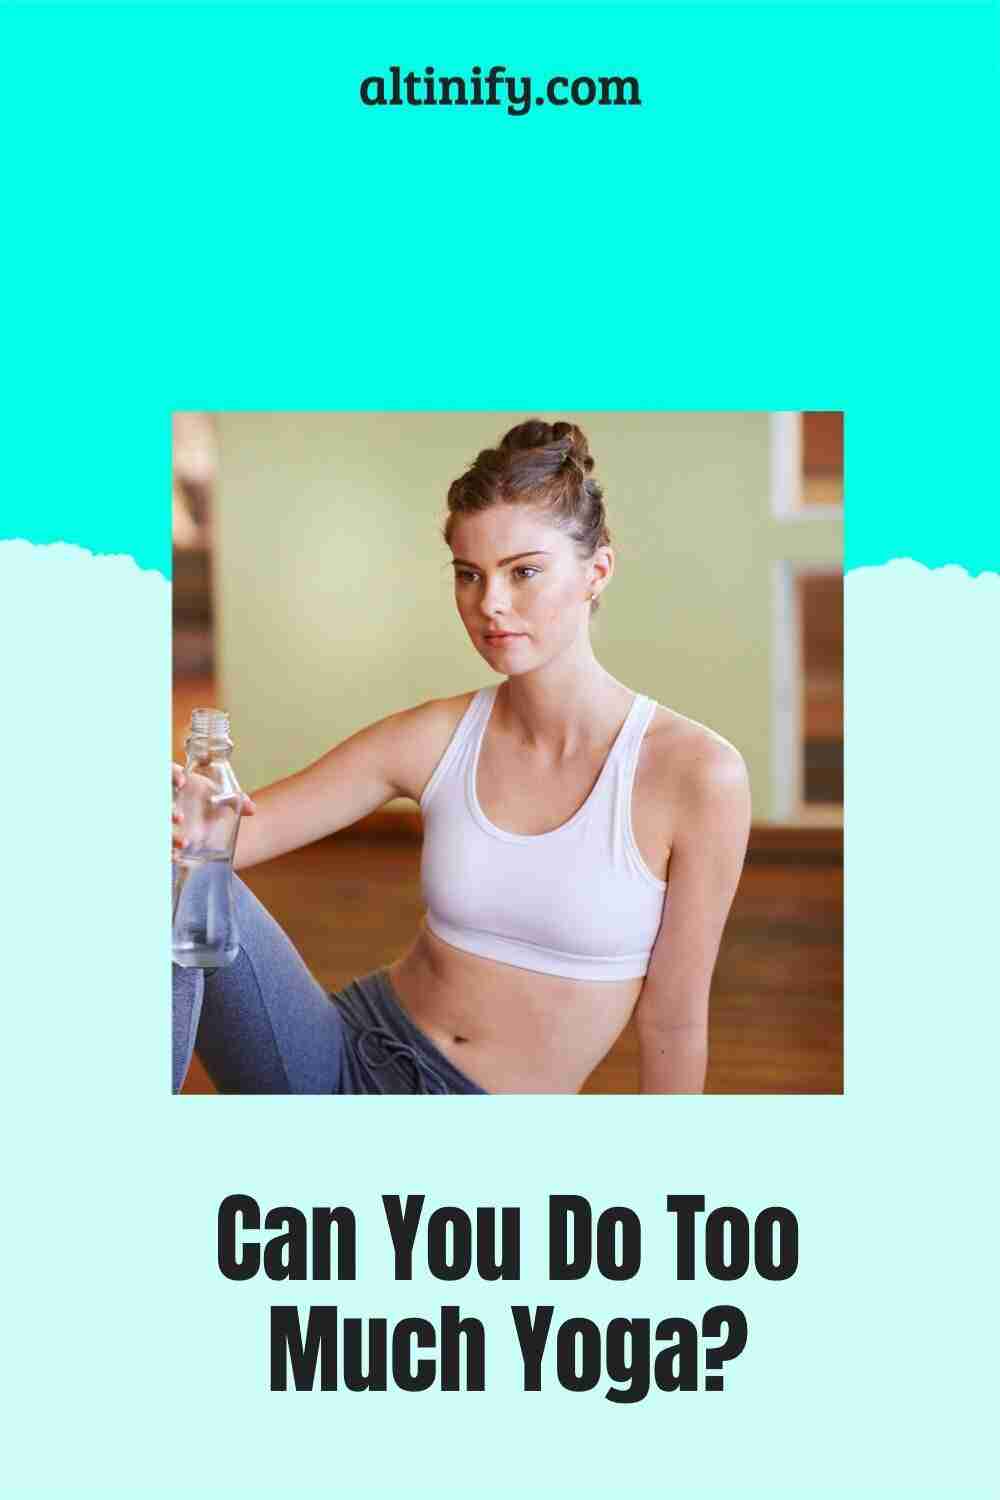 Can You Do Too Much Yoga?